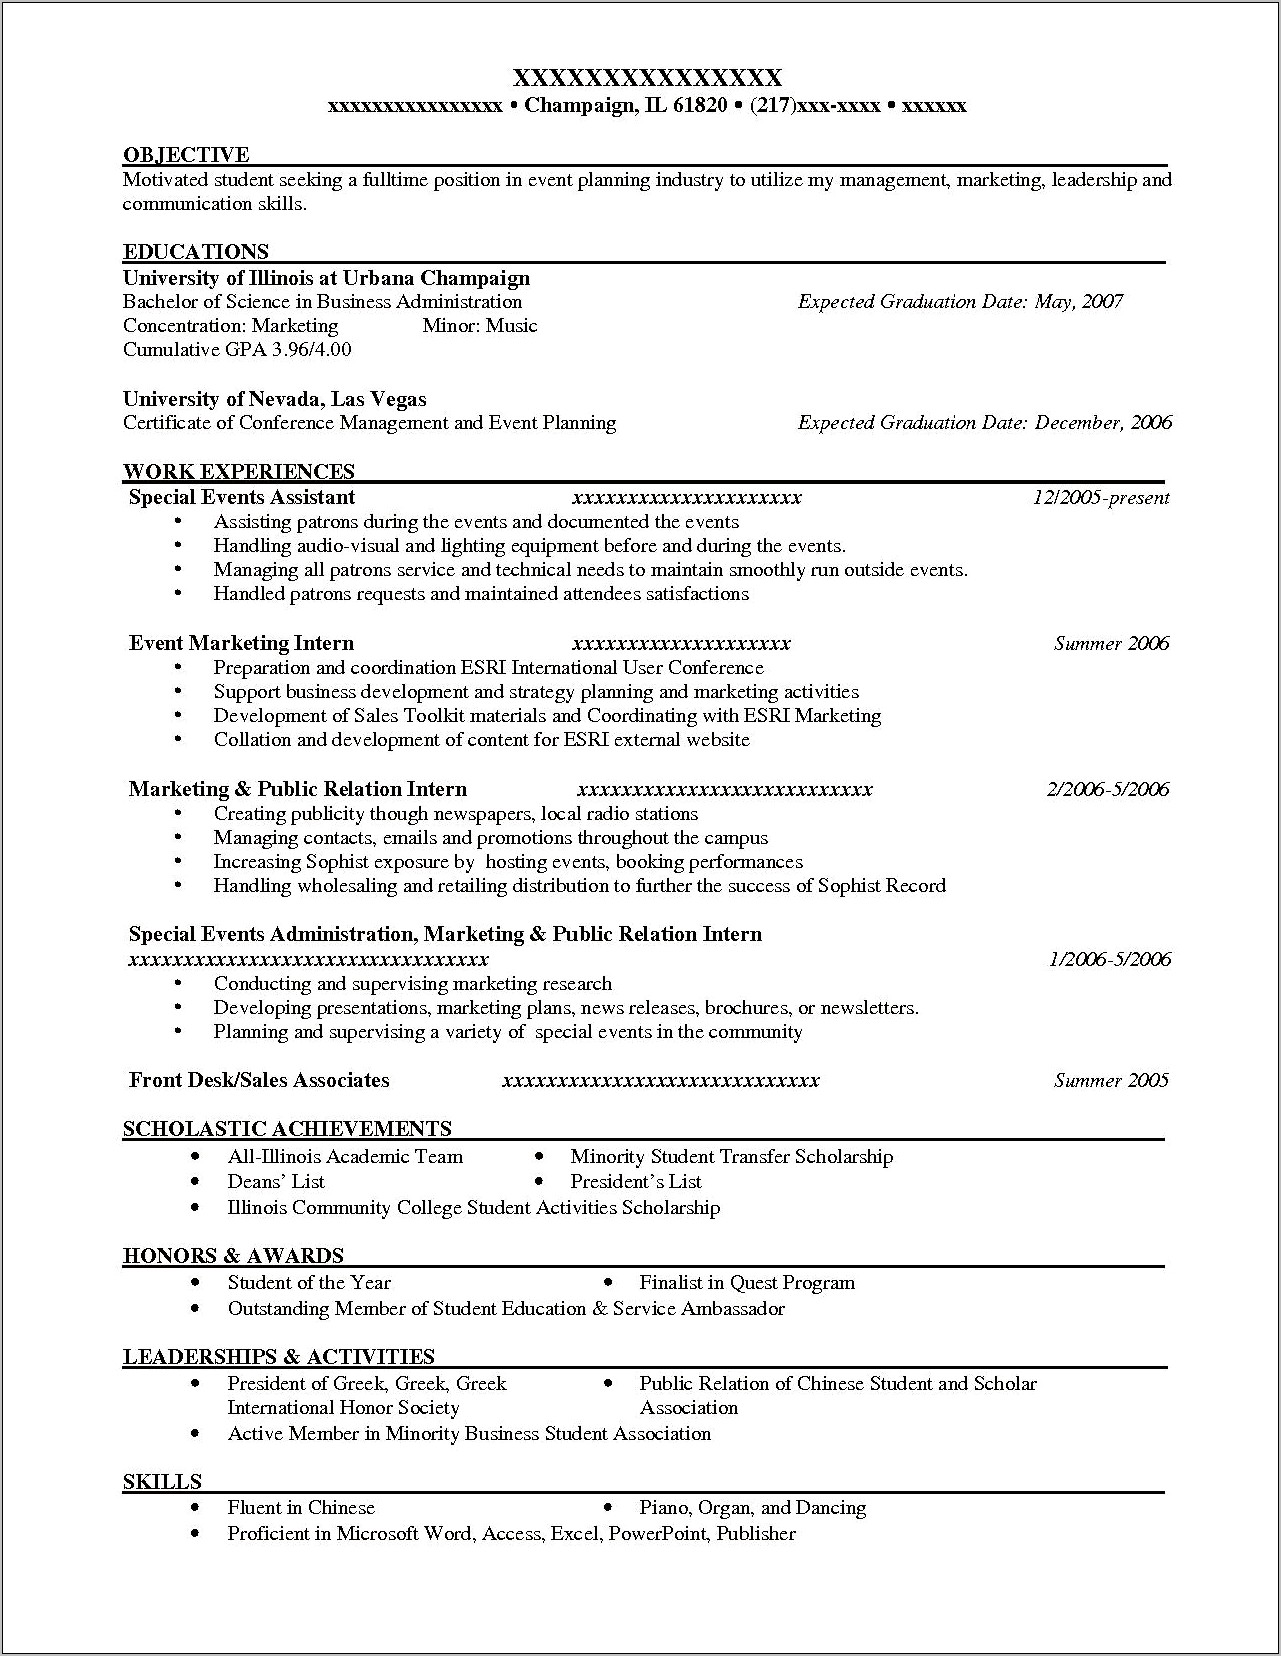 Example Of An Objective Statement On A Resume